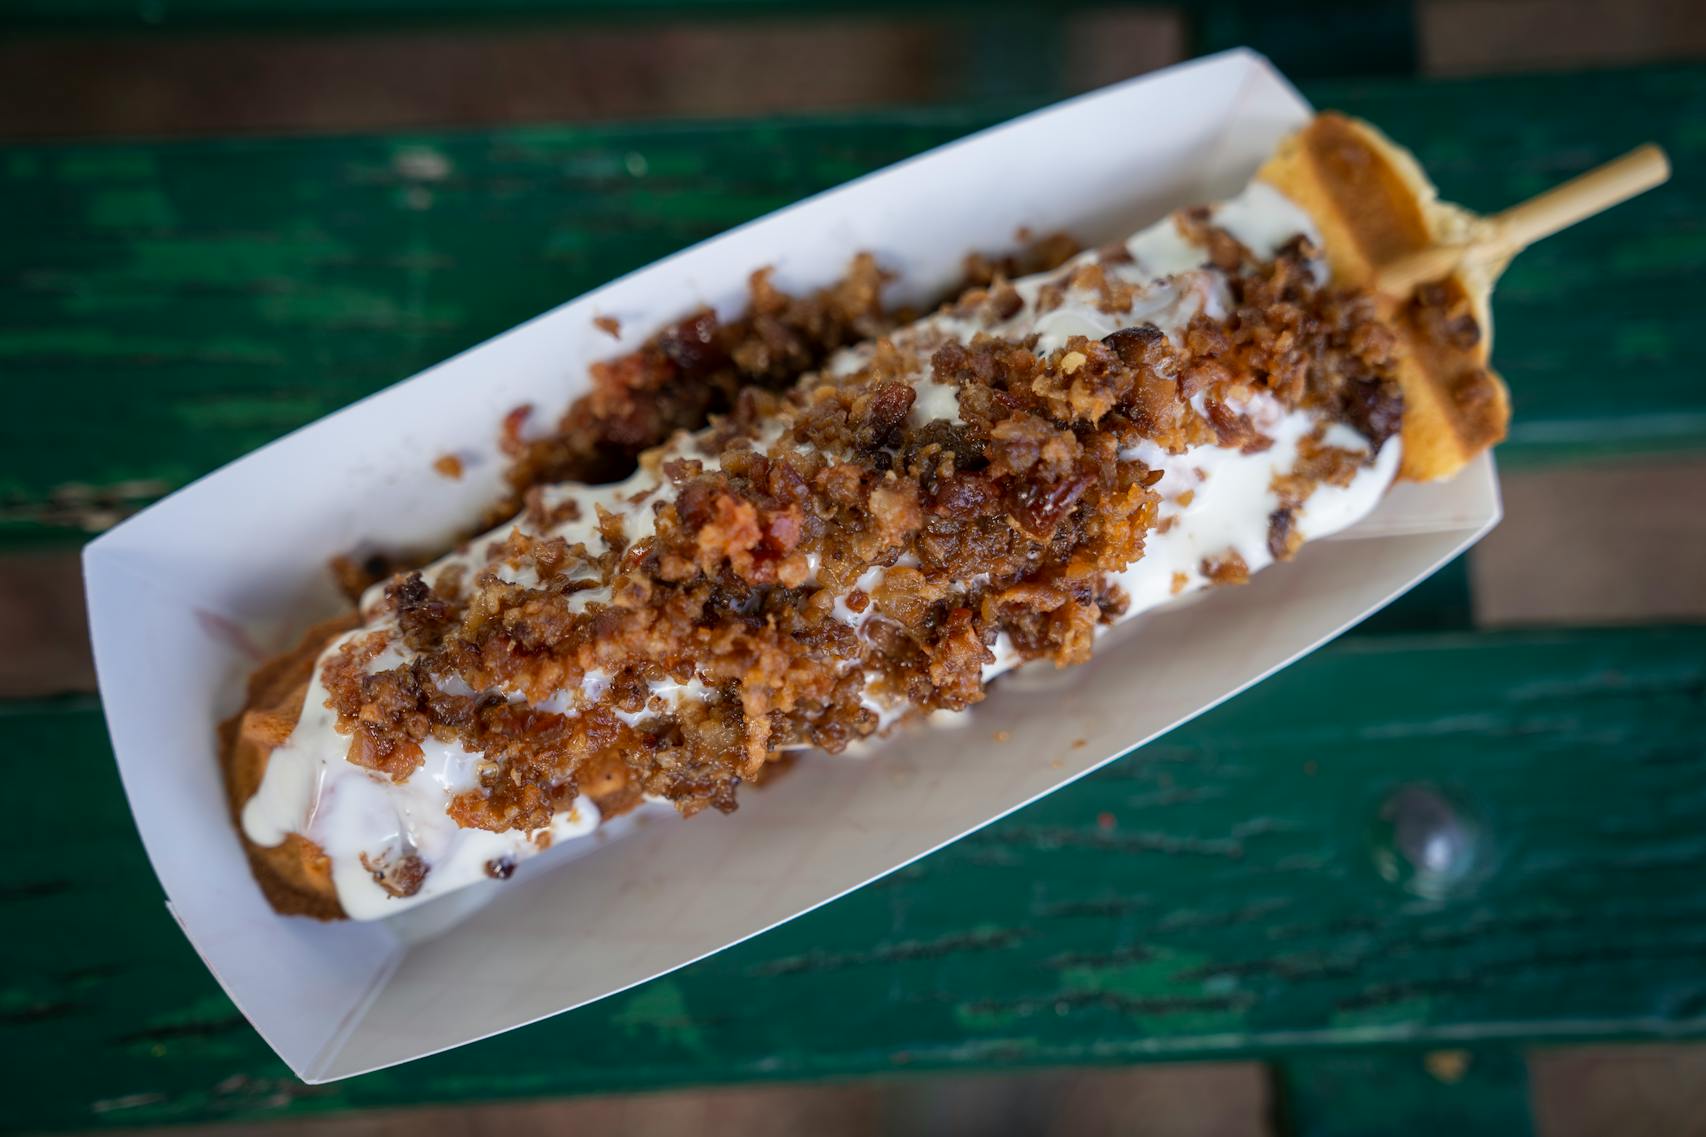 Chicken Bacon Ranch Waffle Stick from Waffle Chix. The new foods of the 2023 Minnesota State Fair photographed on the first day of the fair in Falcon Heights, Minn. on Tuesday, Aug. 8, 2023. ] LEILA NAVIDI • leila.navidi@startribune.com